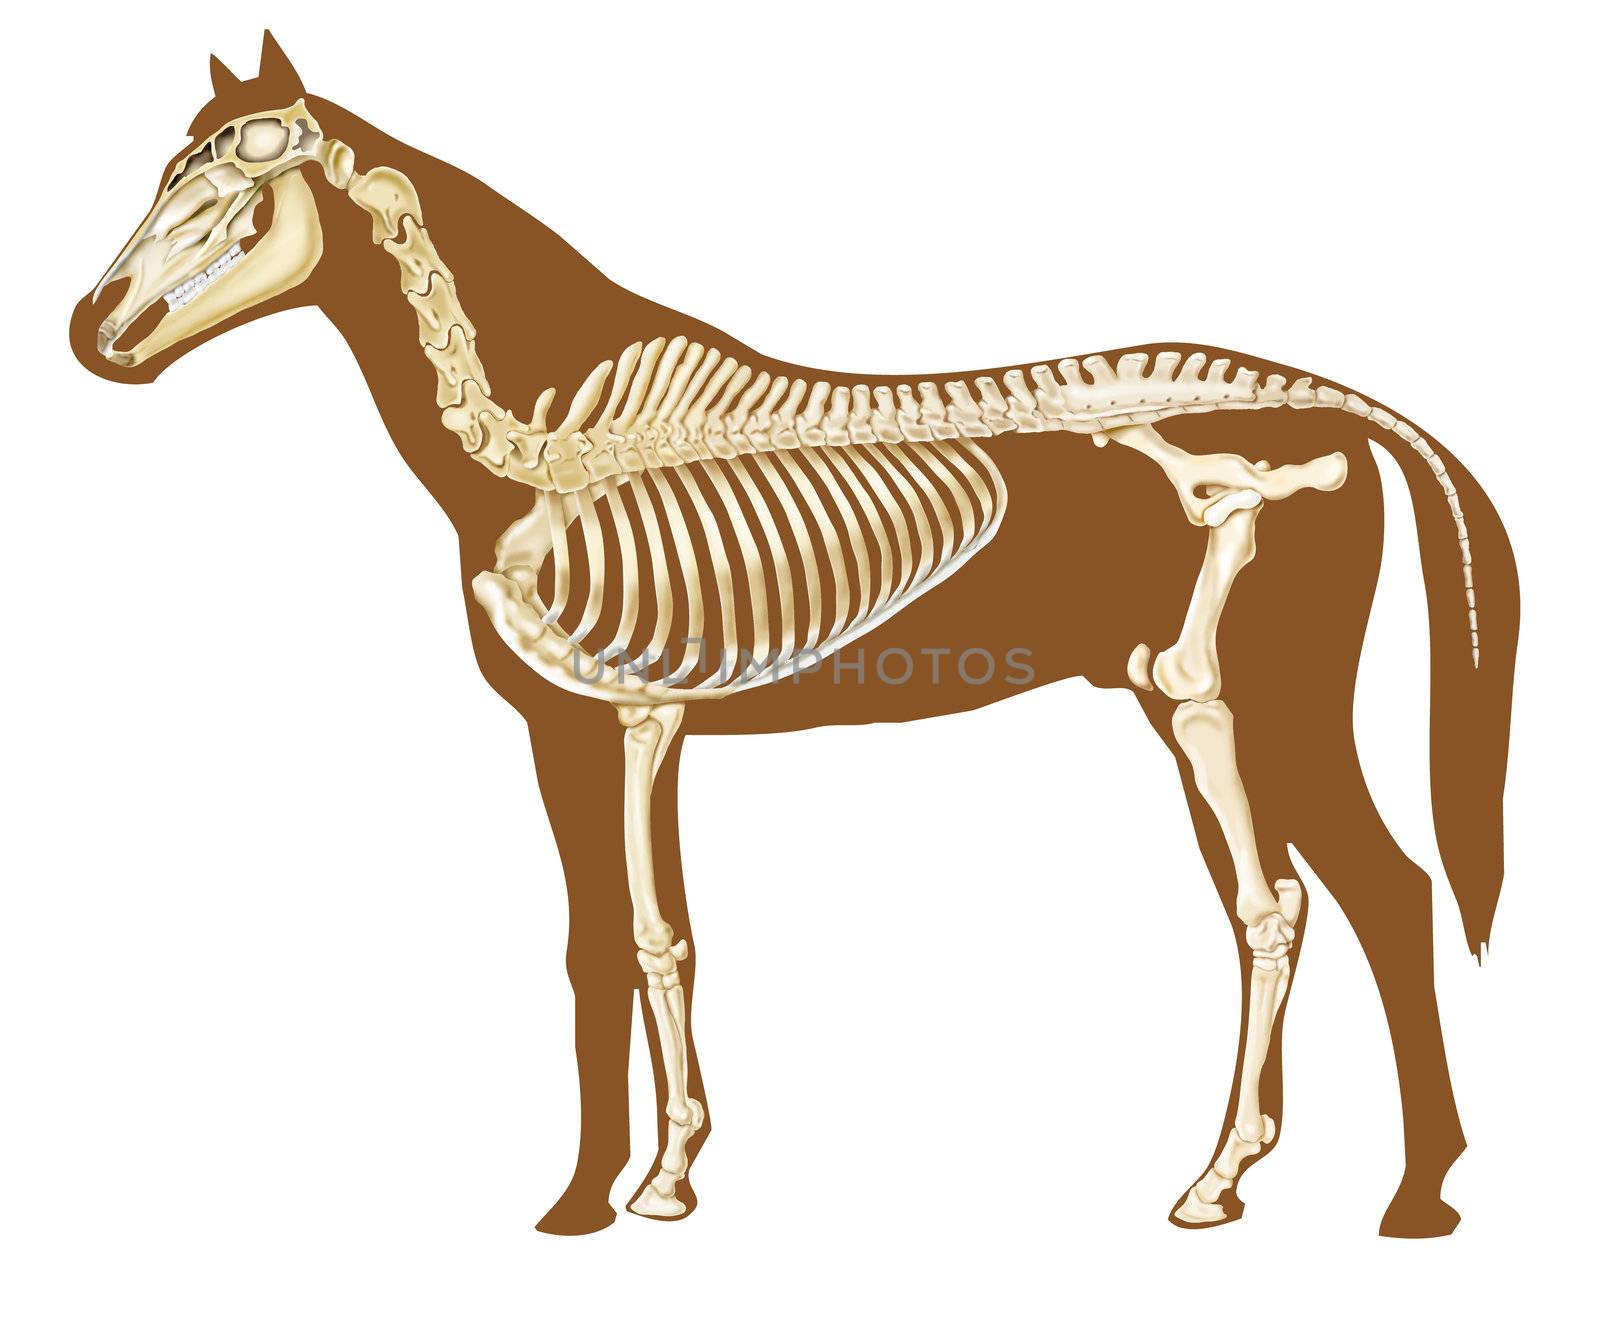 horse skeleton section with bones x-ray